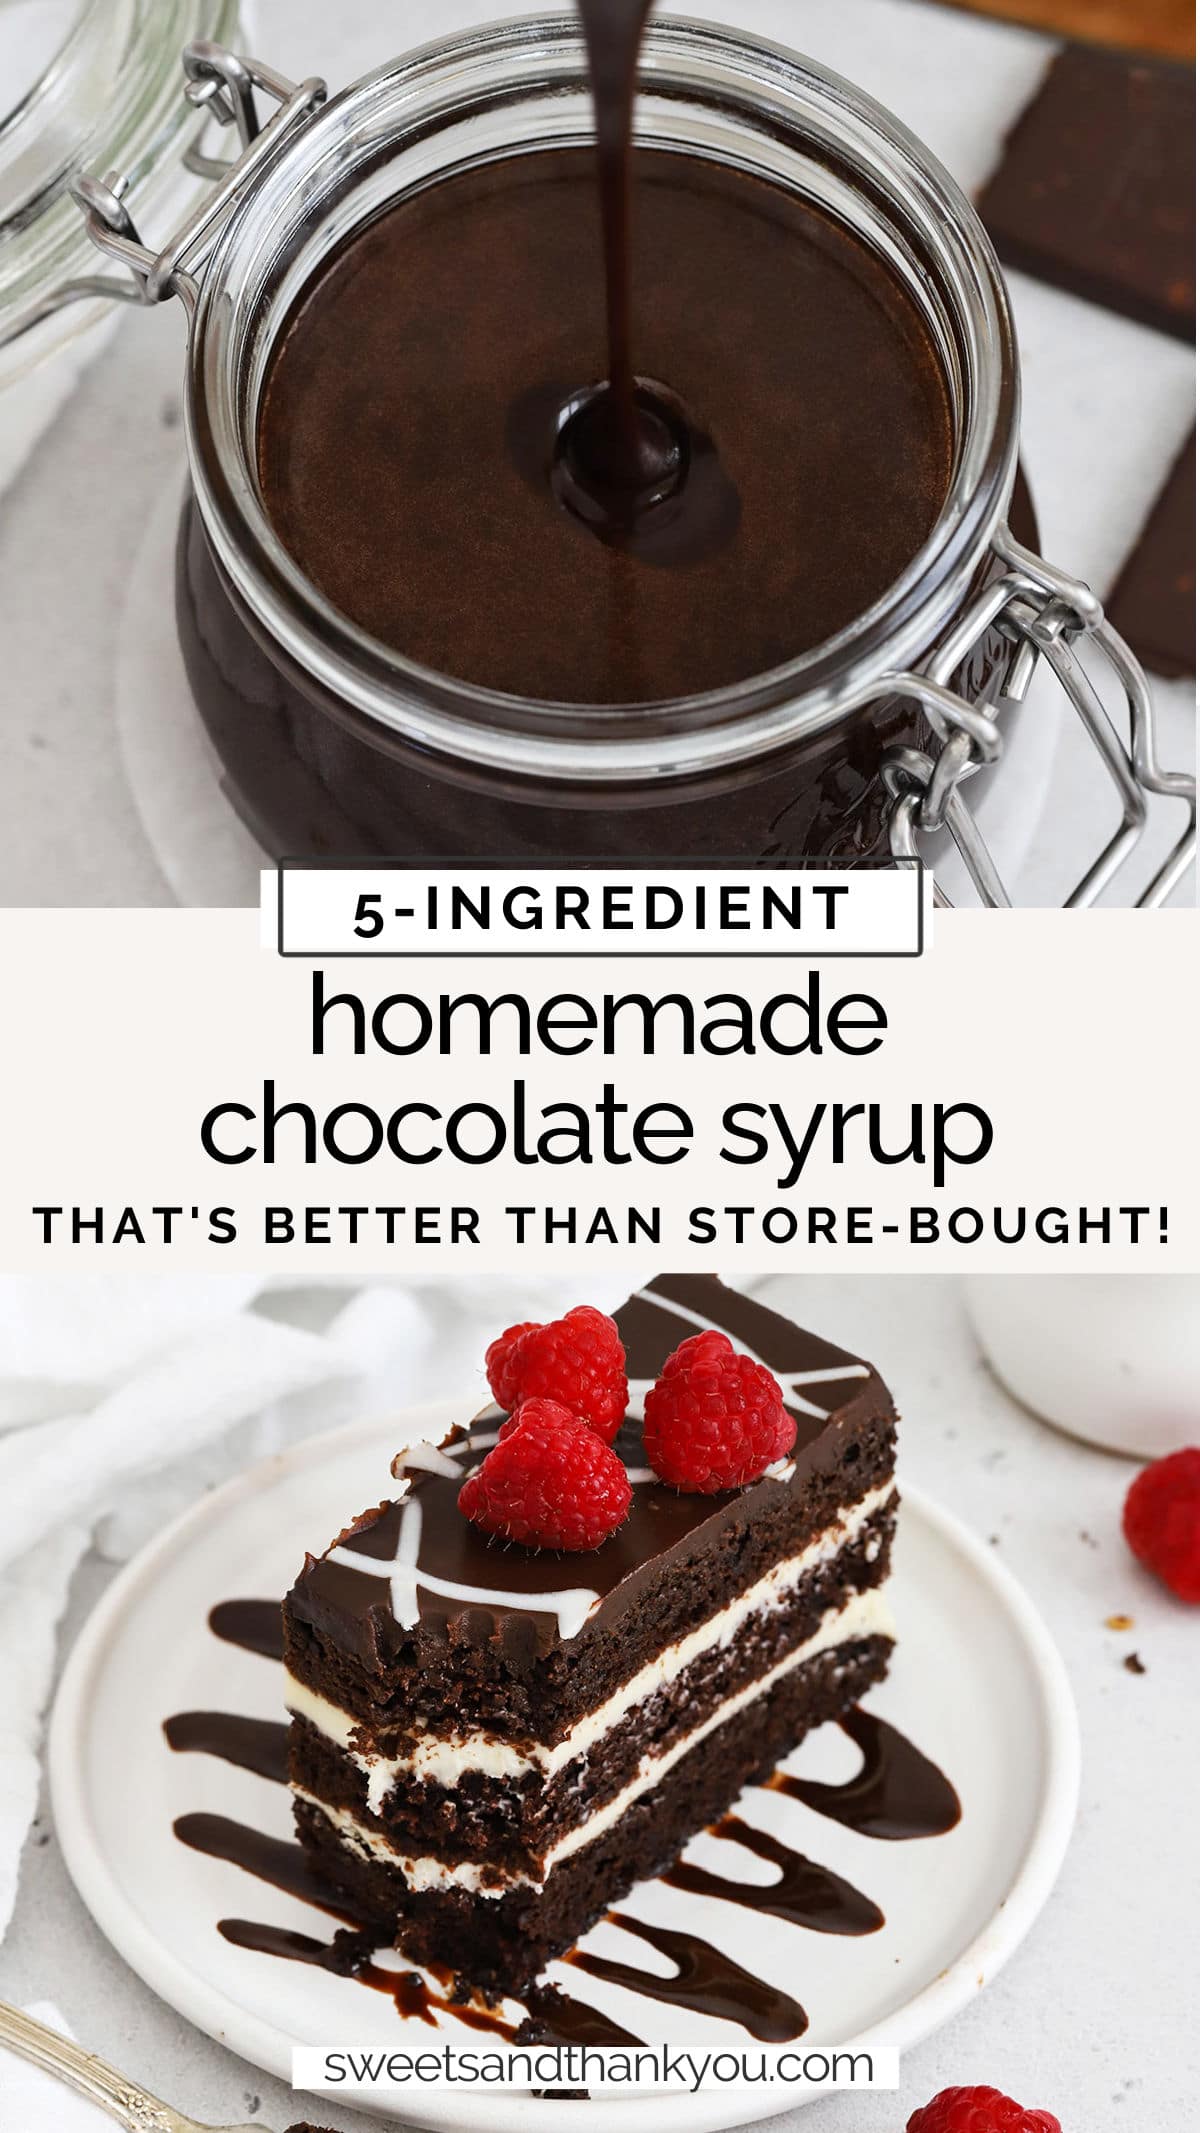 Homemade Chocolate Syrup recipe - This easy chocolate sauce is perfect for ice cream, chocolate milk, and so much more. It's like homemade Hershey's syrup! // Hersheys syrup copycat // homemade chocolate sauce / chocolate sauce fruit dip / 5 ingredient chocolate sauce / chocolate sauce for ice cream / cake plating chocolate sauce / chocolate syrup for ice cream / chocolate syrup fruit dip / hershey's syrup copycat / homemade hershey's chocolate syrup / chocolate syrup for chocolate milk 